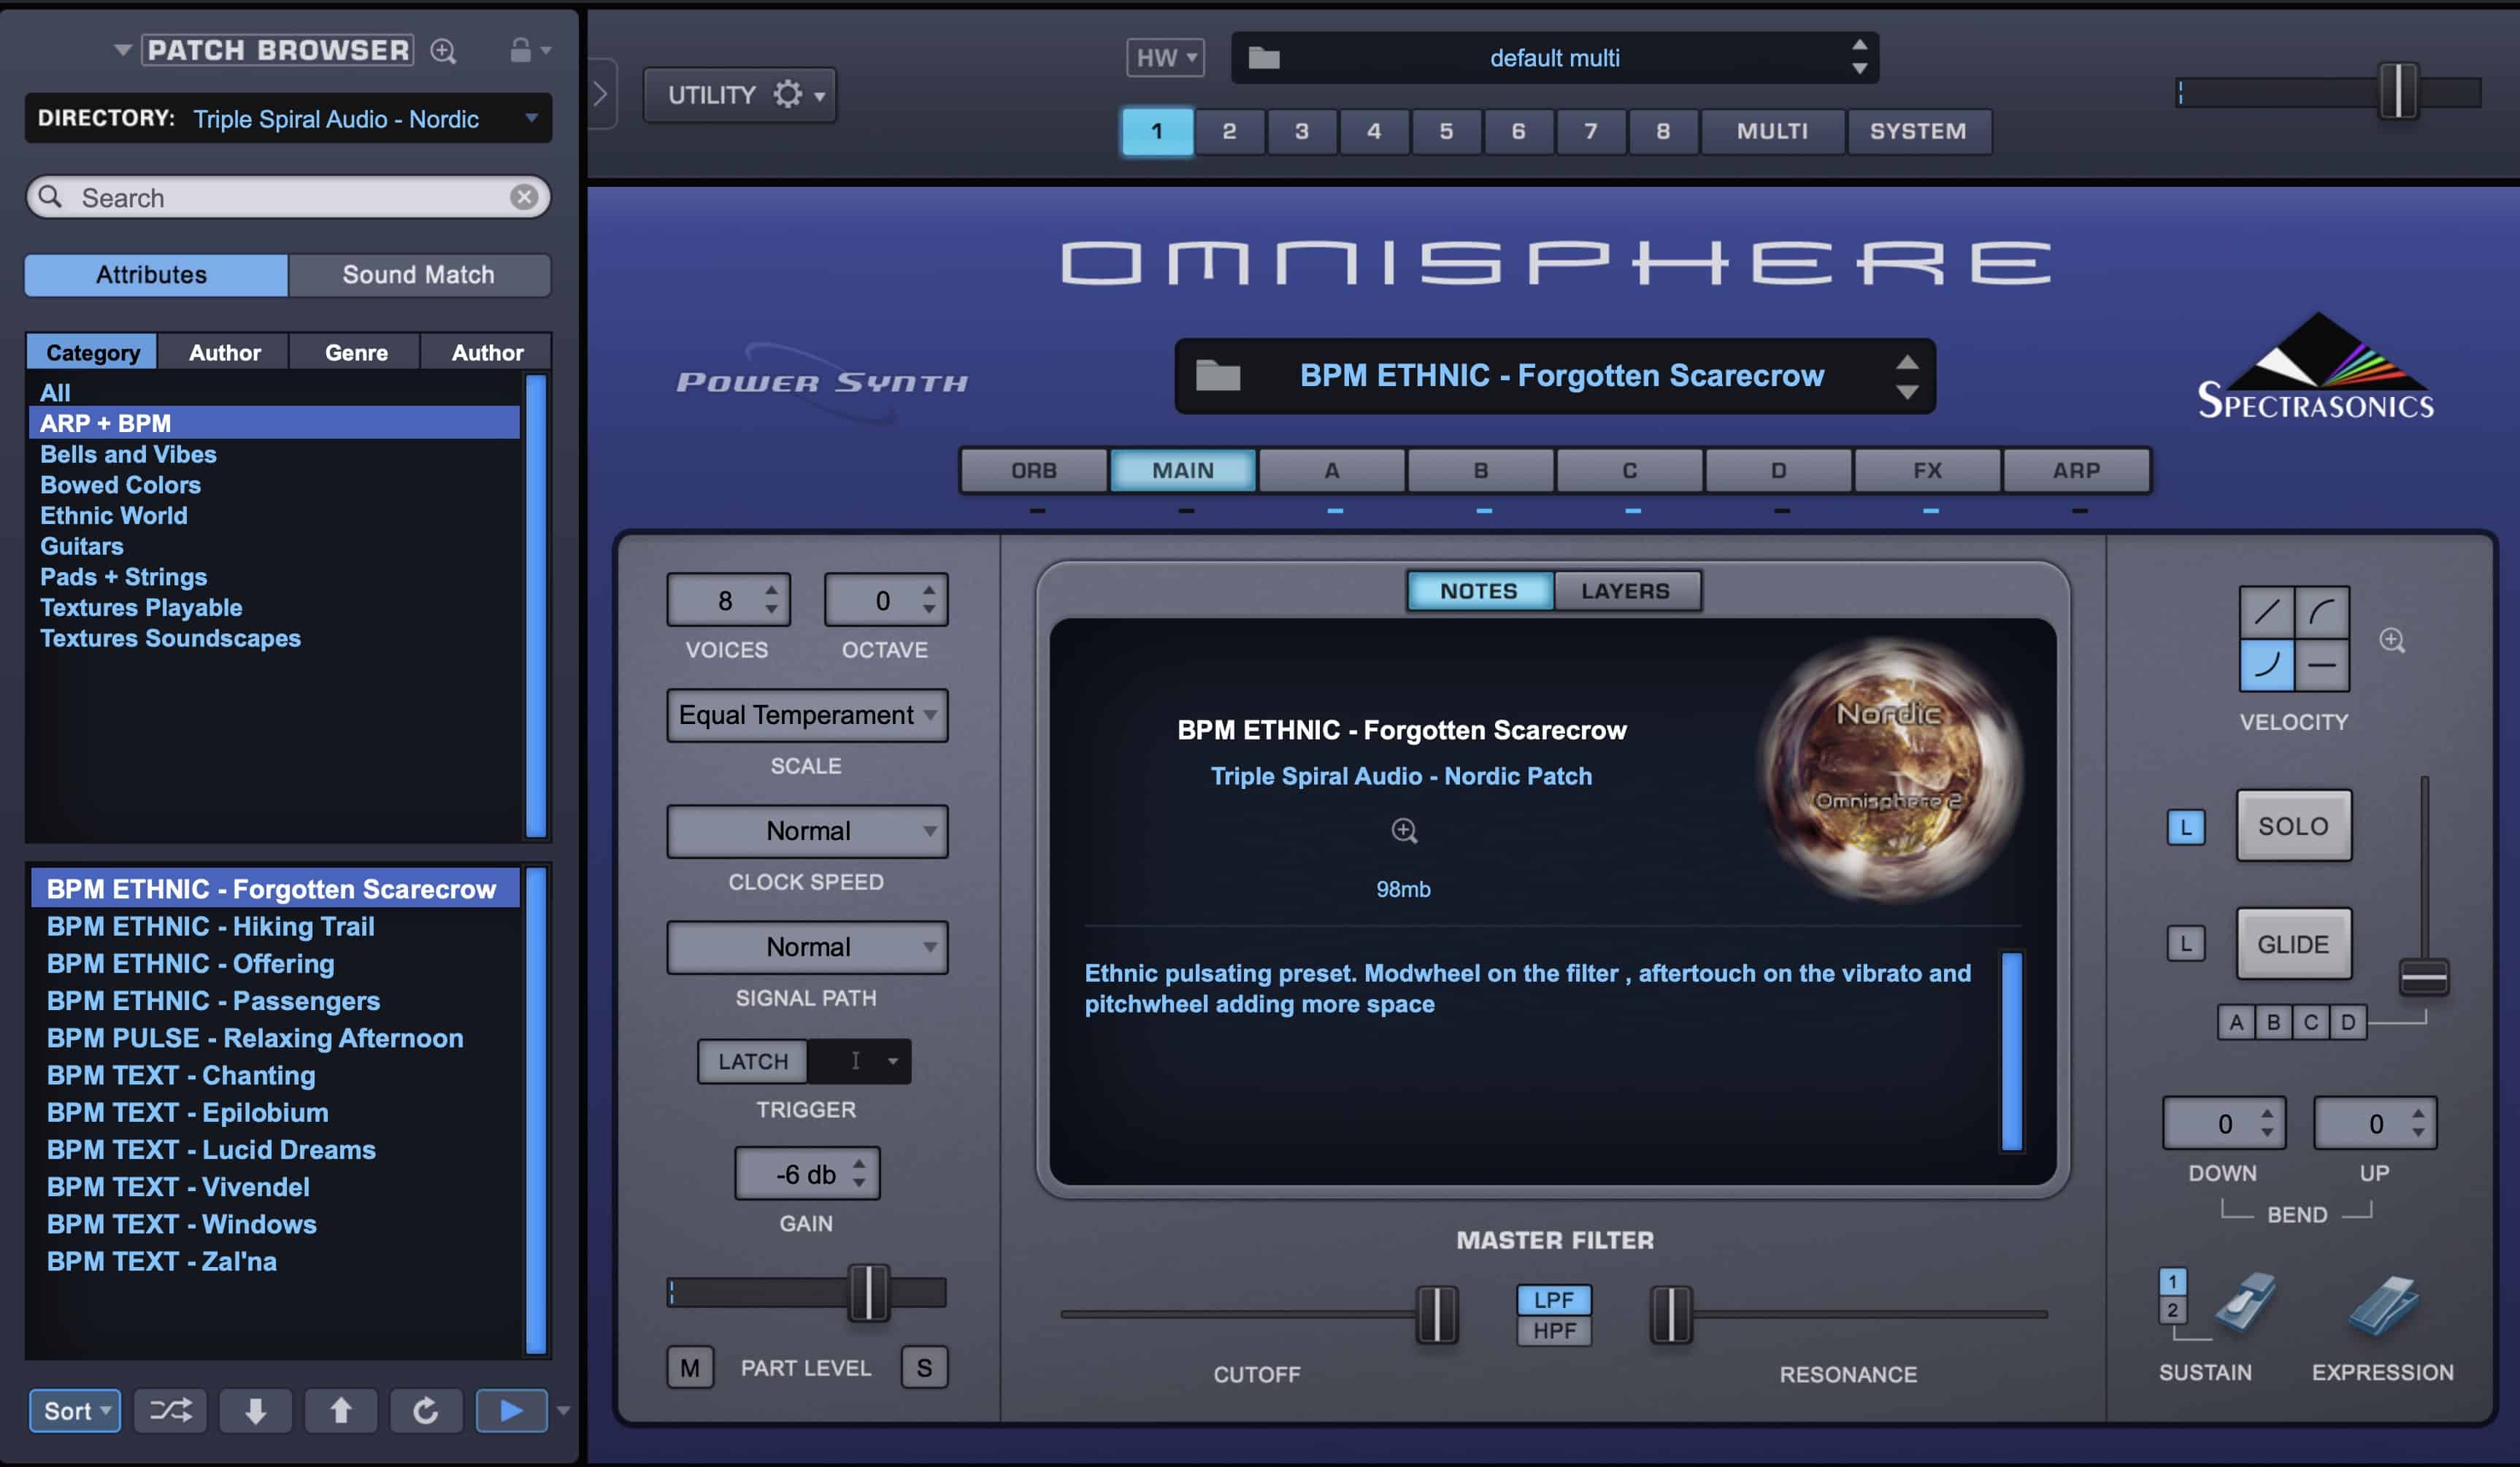 Nordic an Omnisphere by Triple Spiral Audio is now available